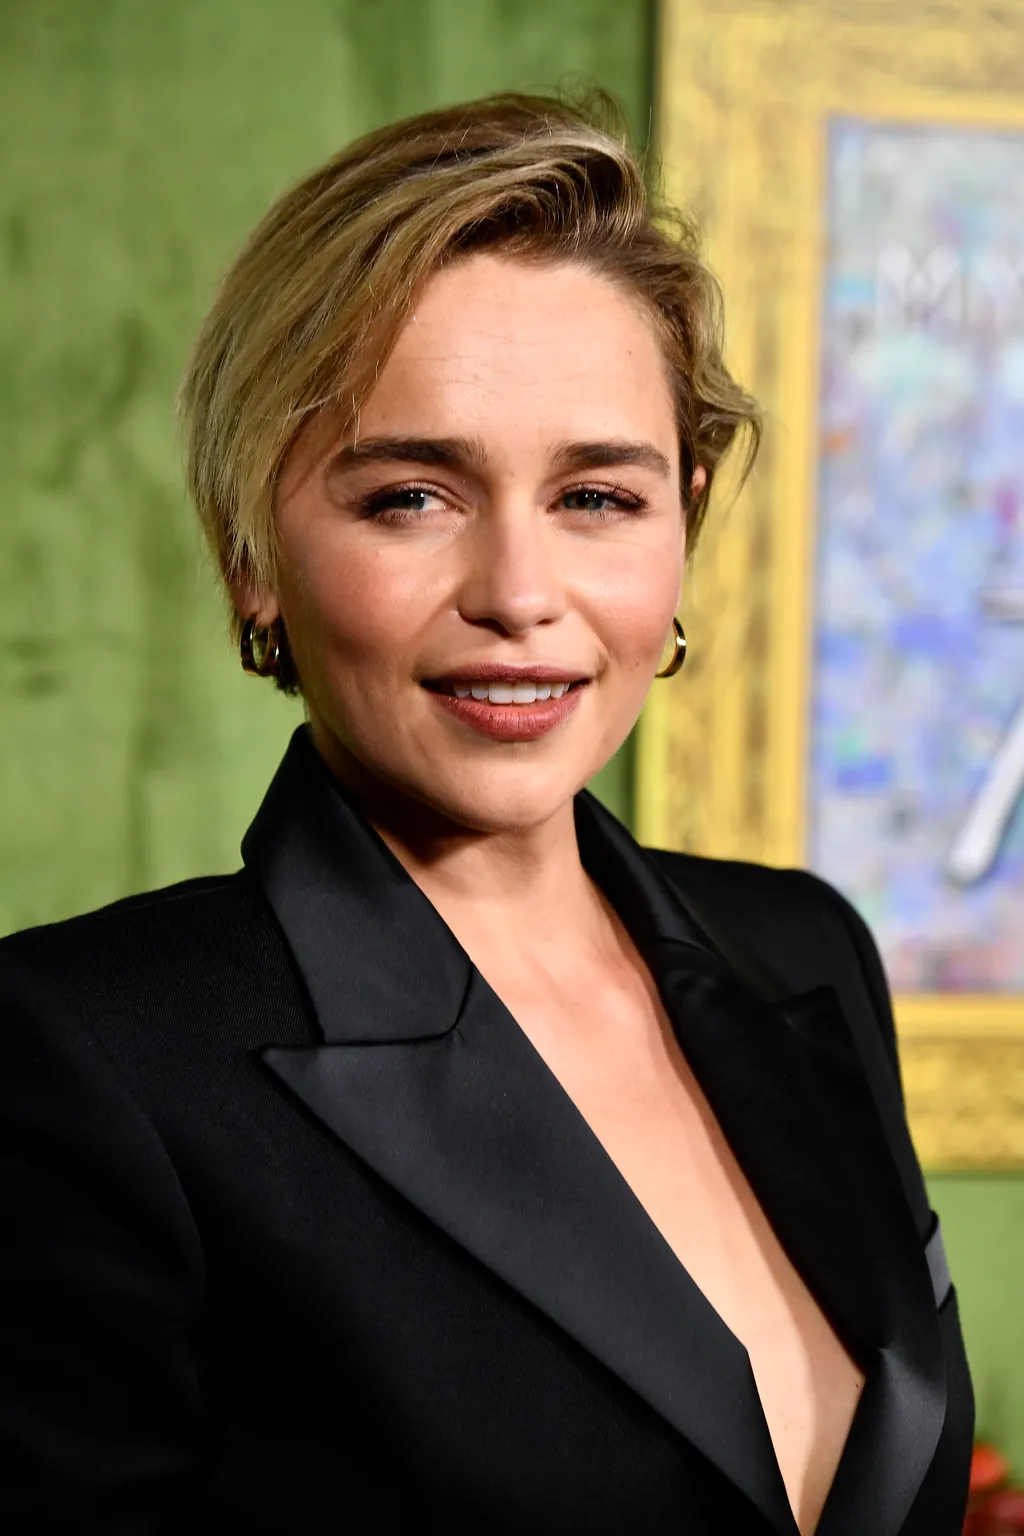 HBO Films' "My Dinner With Herve" Premiere - Arrivals GettyImageRank1 Arts Culture and Entertainment Celebrities topics topix bestof toppics toppix Emilia Clarke 